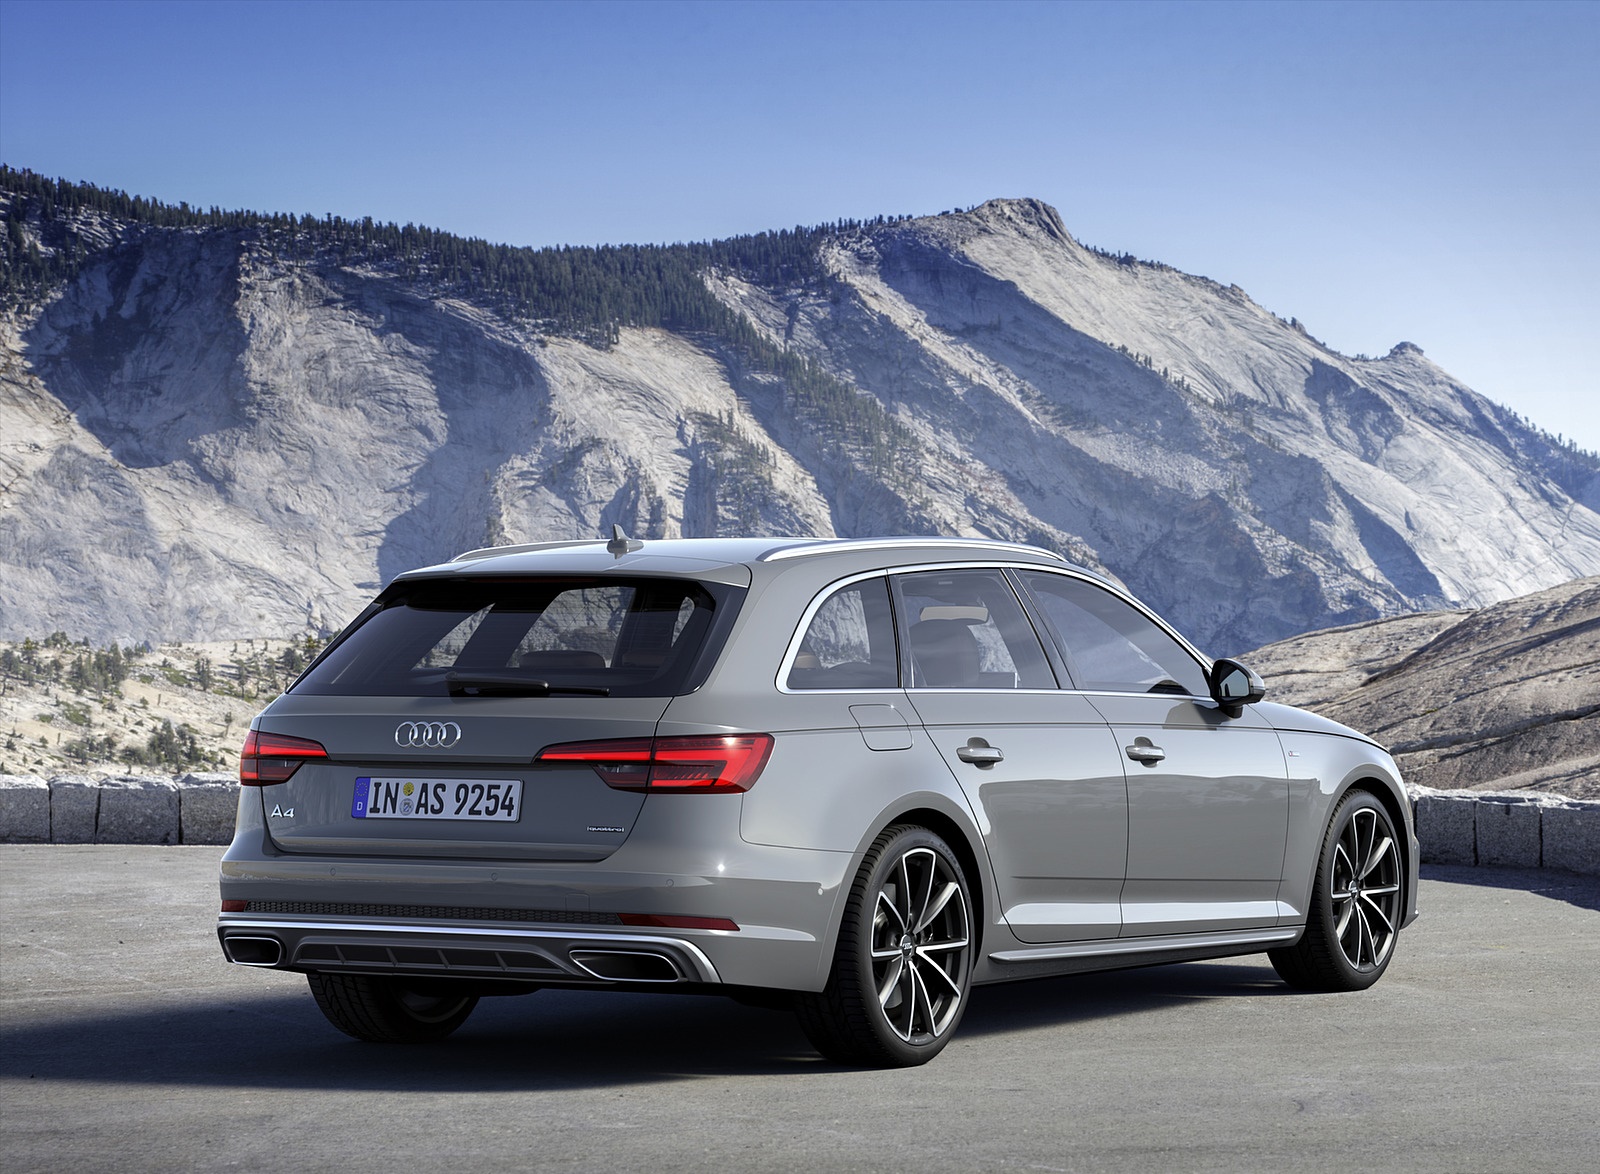 2019 Audi A4 Avant Rear Three-quarter Wallpaper - Yosemite National Park, Olmsted Point , HD Wallpaper & Backgrounds